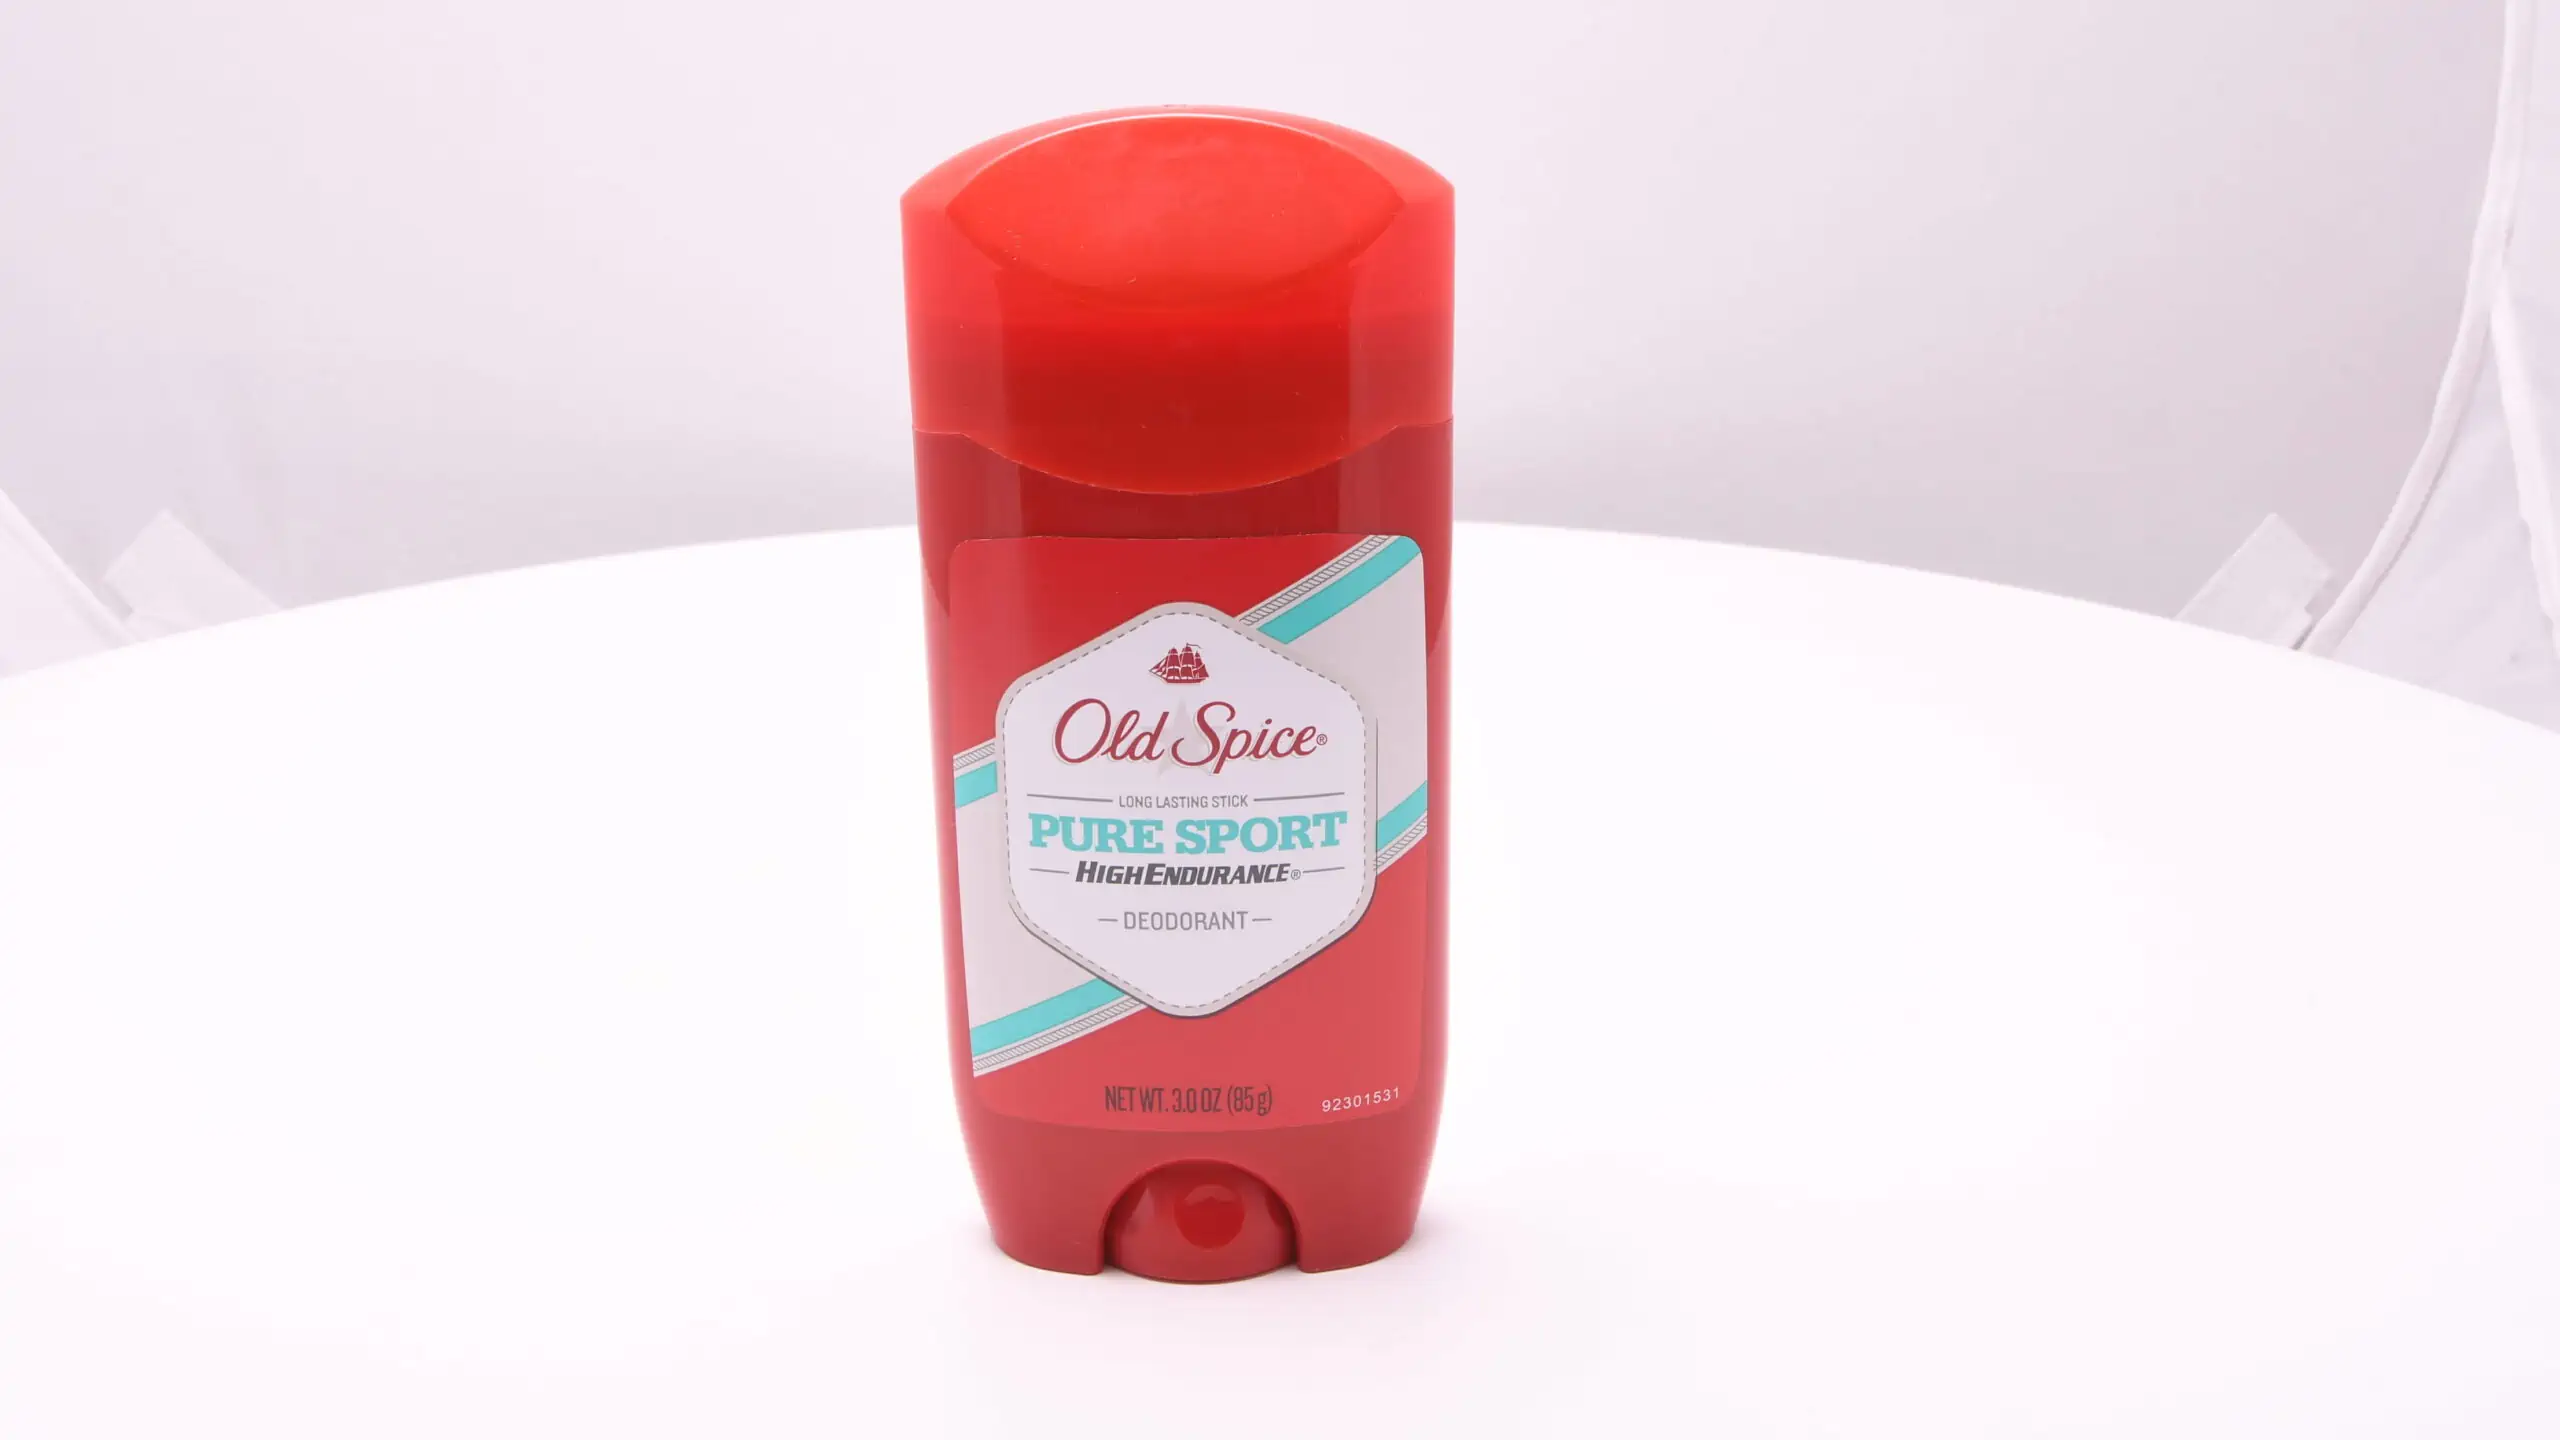 A typical example of solid-stick deodorant, from Old Spice.